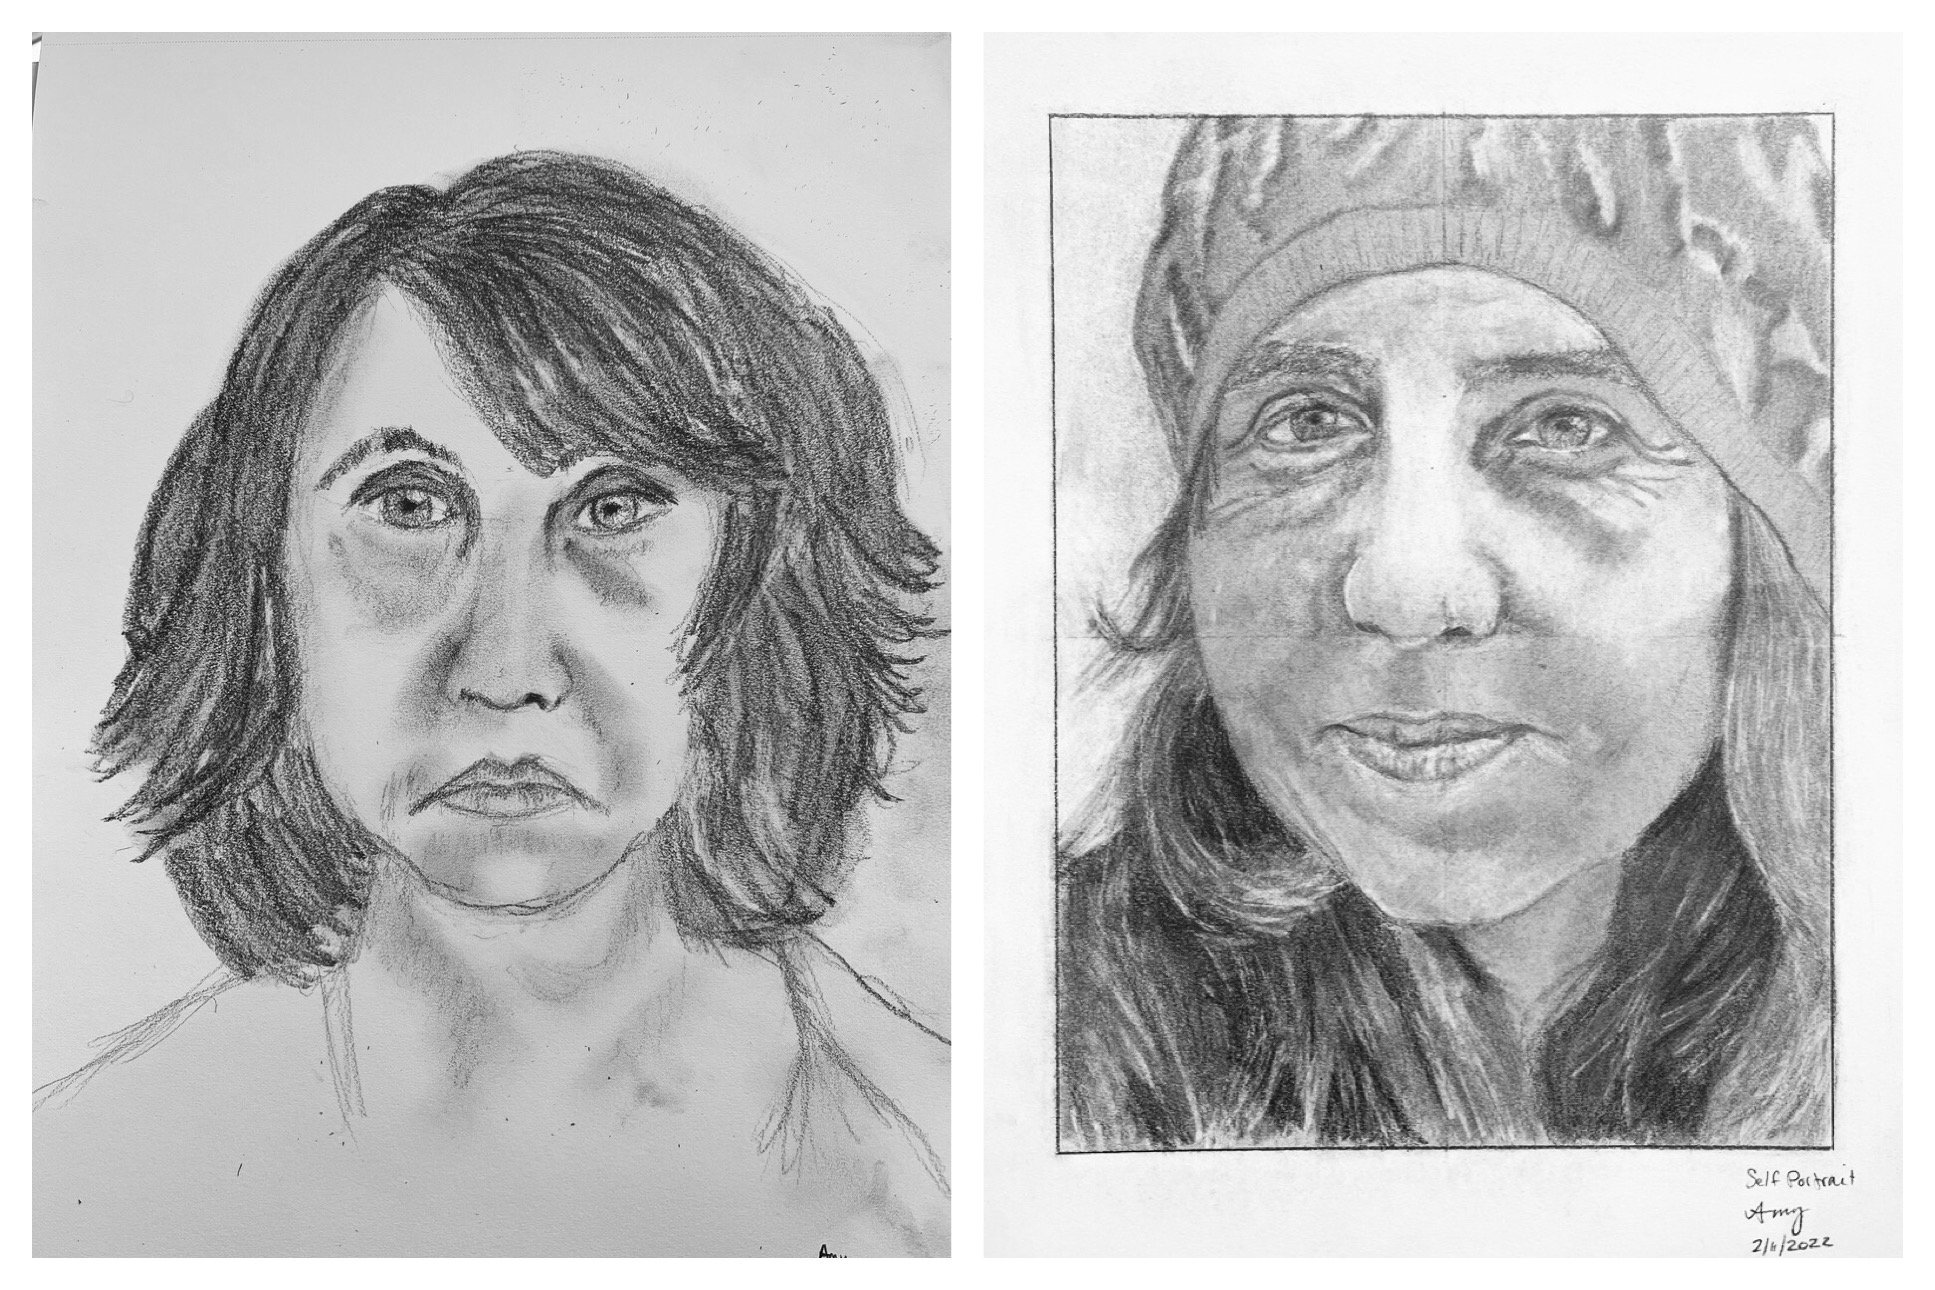 Amy's Before and After Self-Portraits February 7-12, 2022